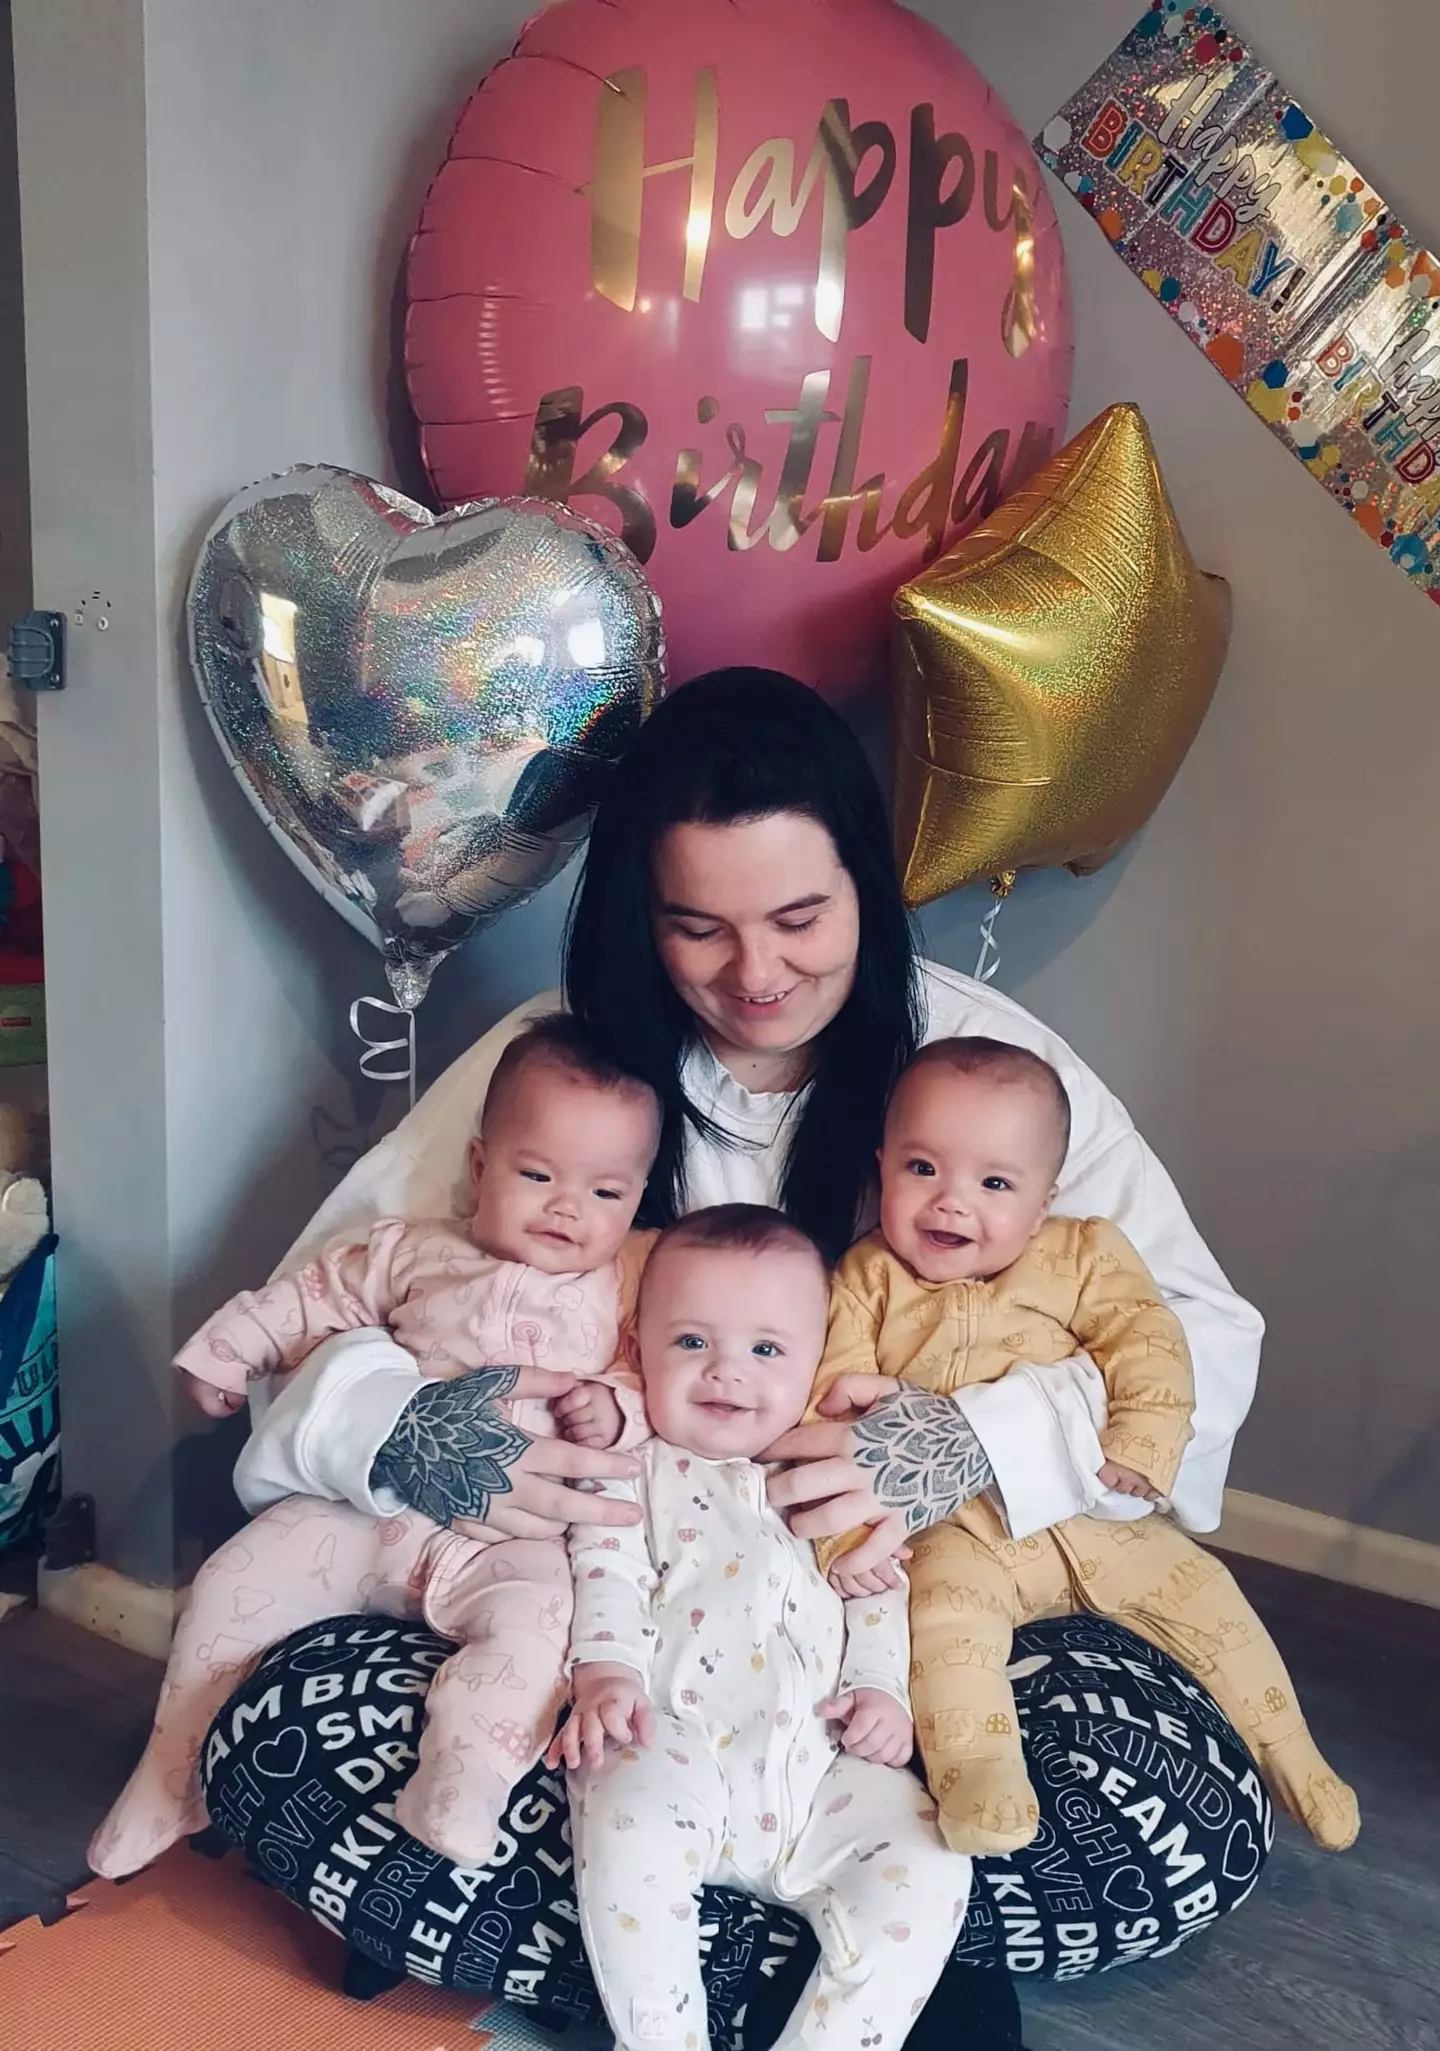 The mum fell pregnant with triplets while on the pill.